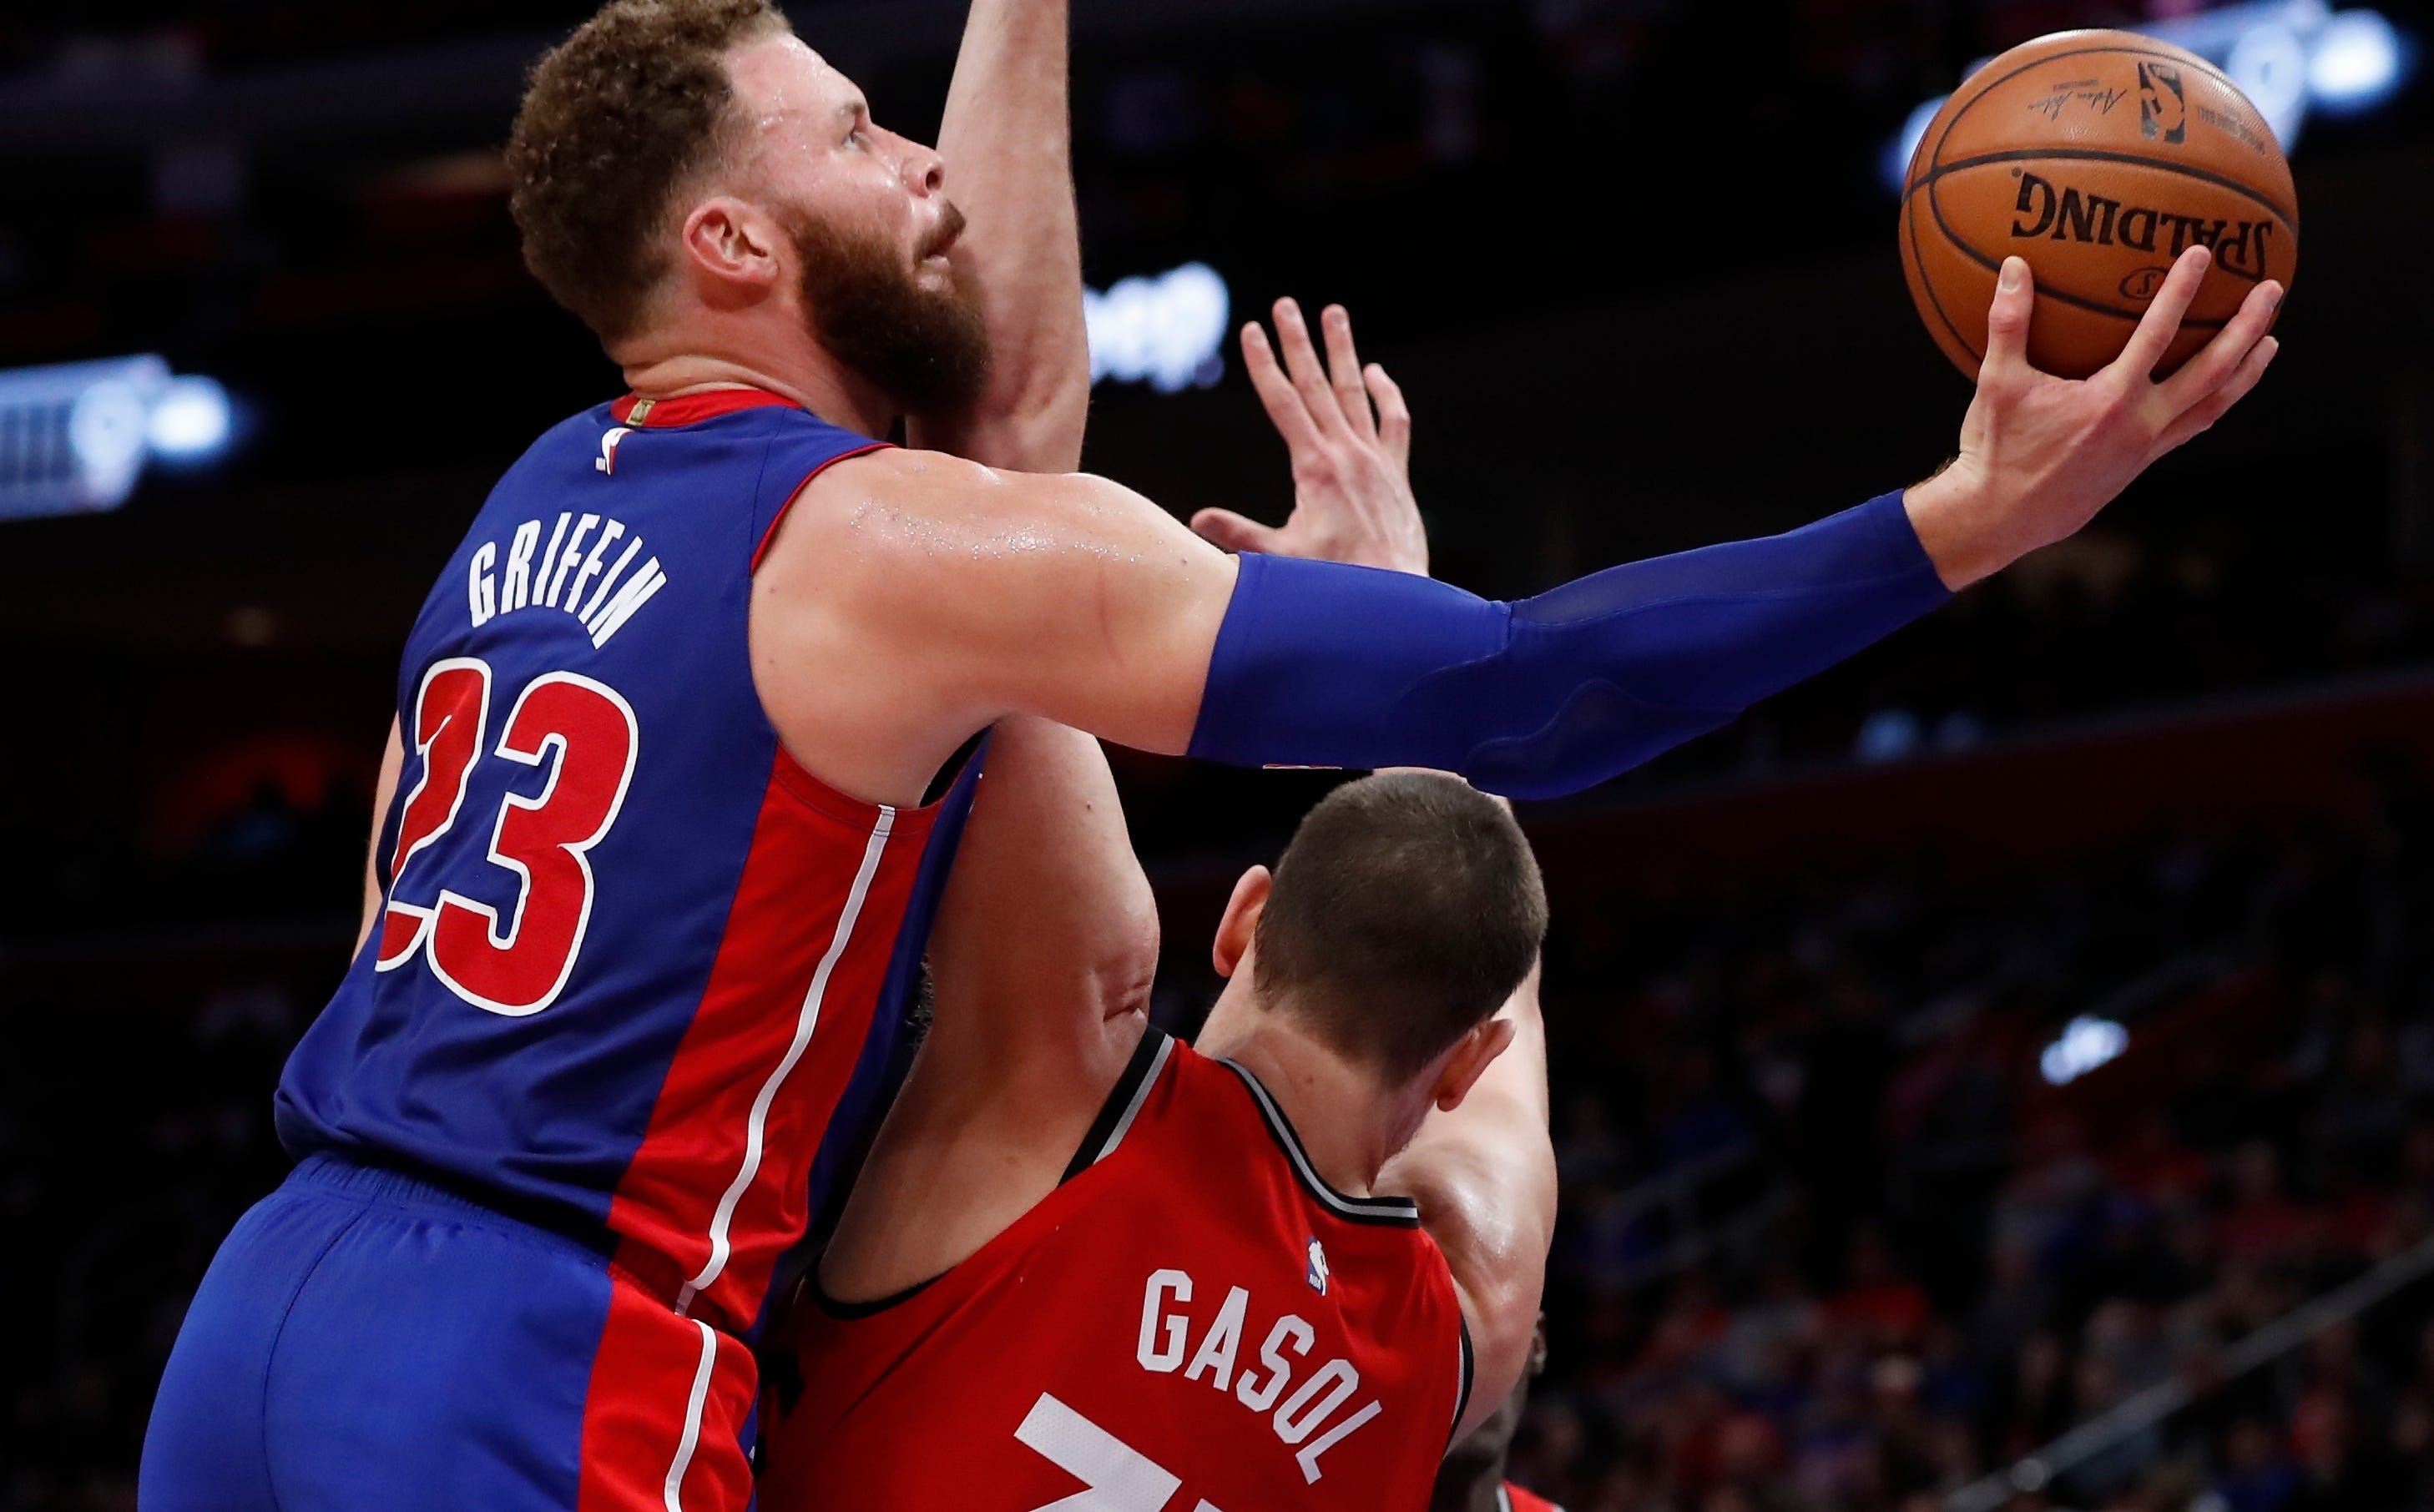 Detroit Pistons forward Blake Griffin (23) attempts a layup as Toronto Raptors center Marc Gasol (33) defends during the first half.